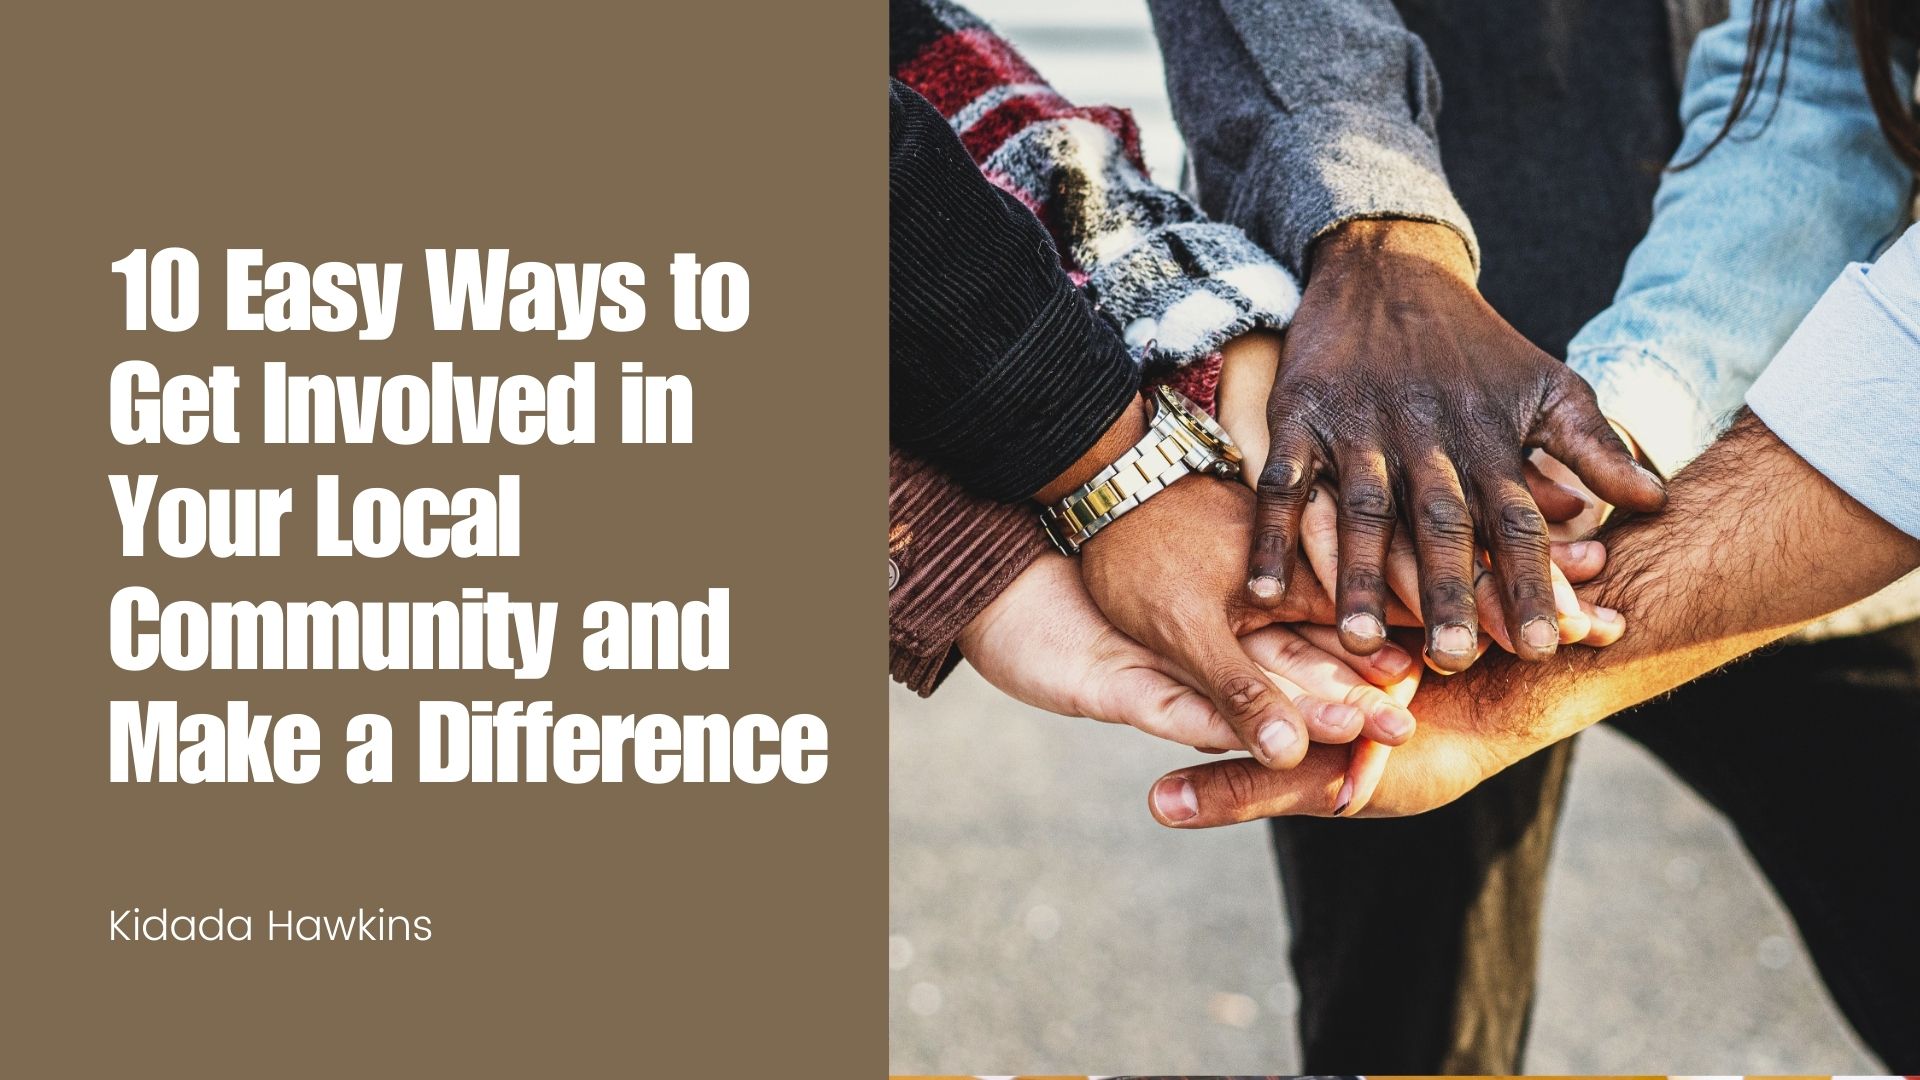 10 Easy Ways to Get Involved in Your Local Community and Make a Difference